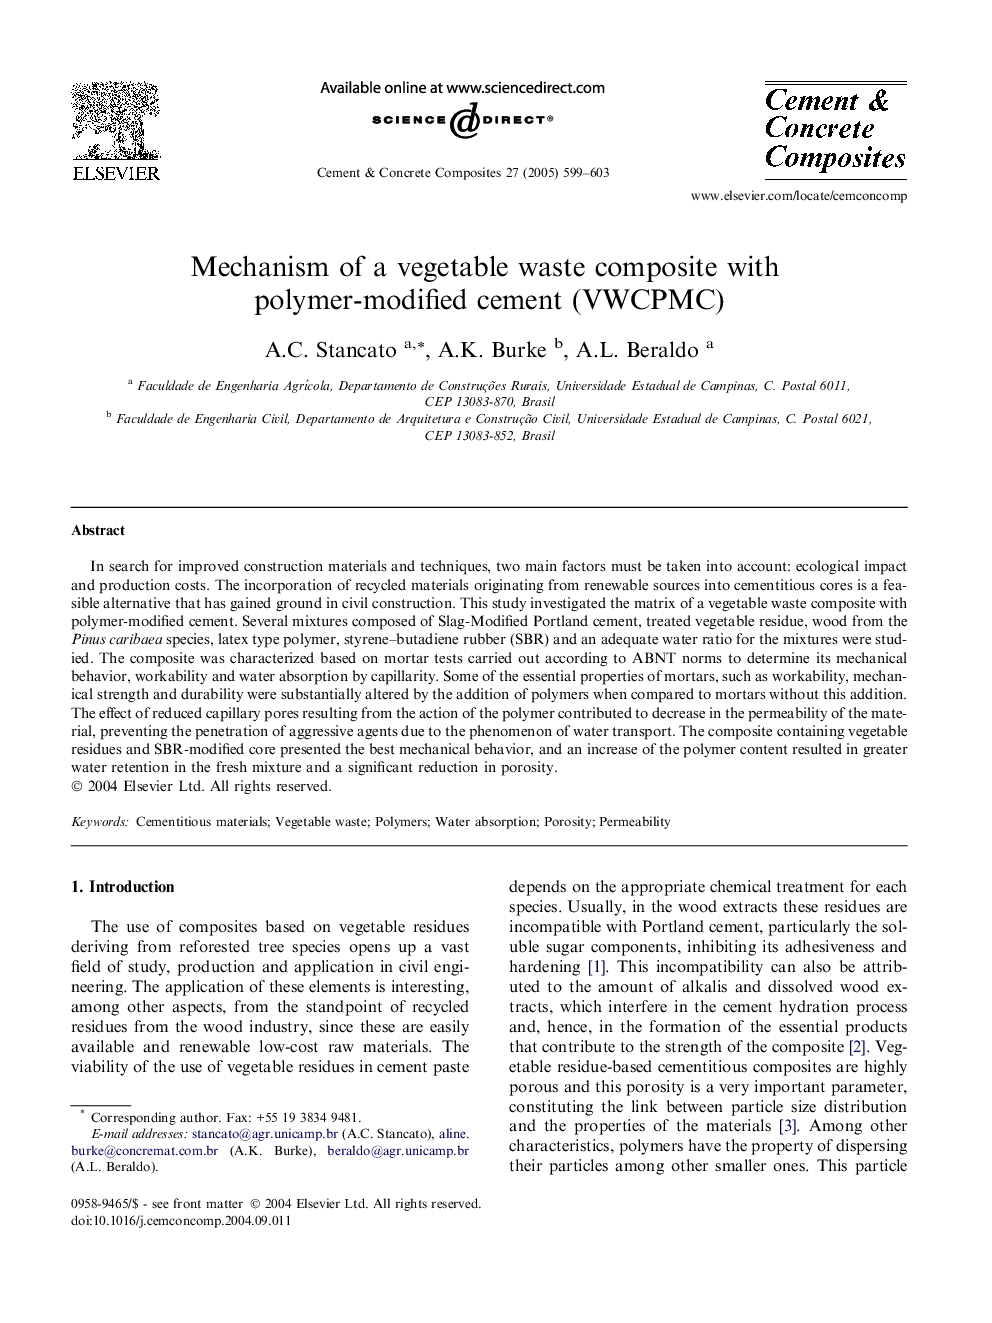 Mechanism of a vegetable waste composite with polymer-modified cement (VWCPMC)